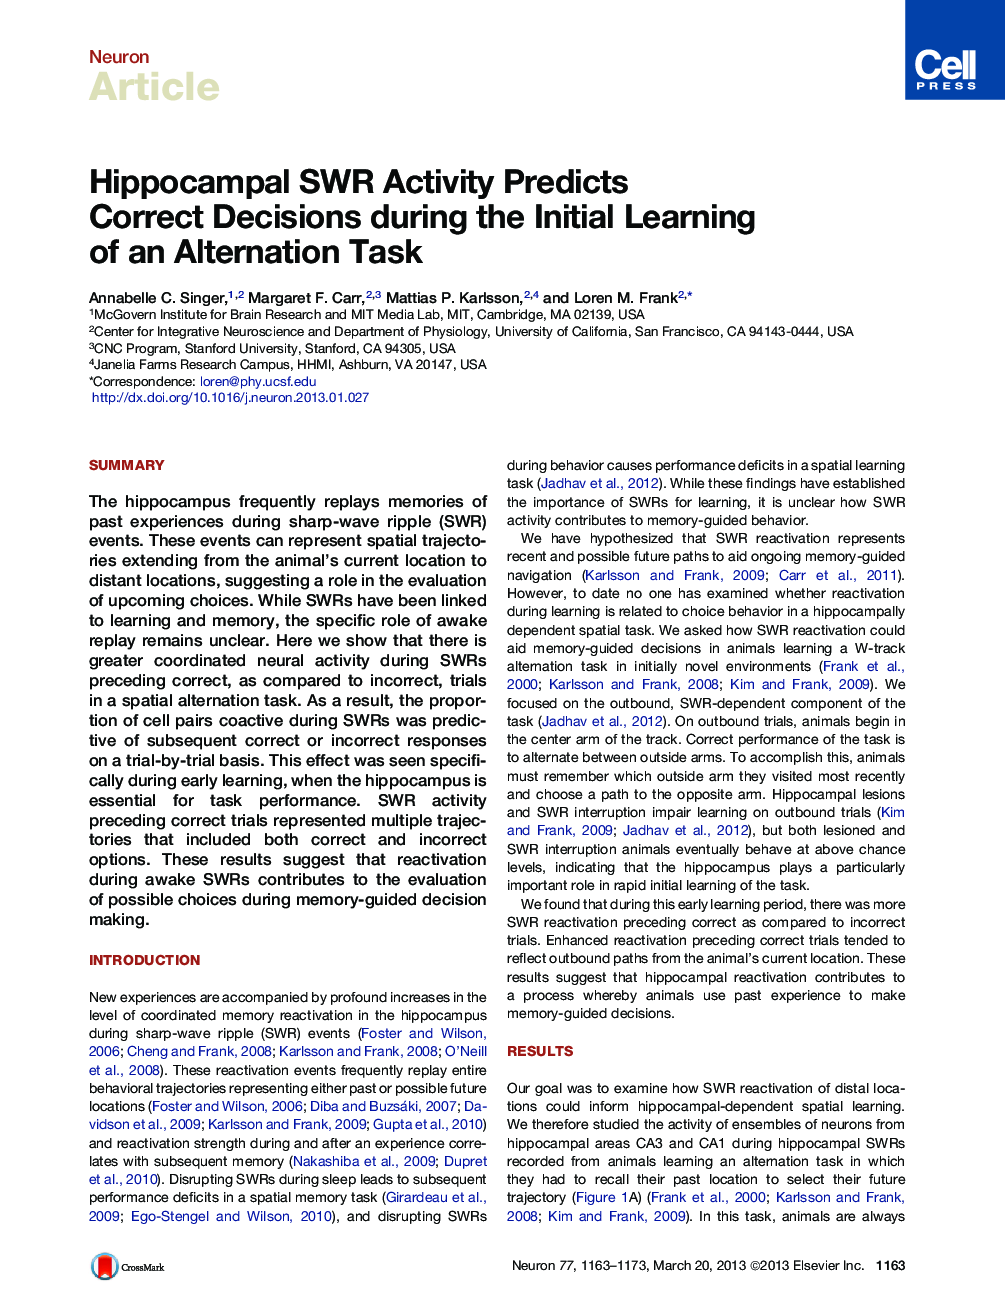 Hippocampal SWR Activity Predicts Correct Decisions during the Initial Learning of an Alternation Task